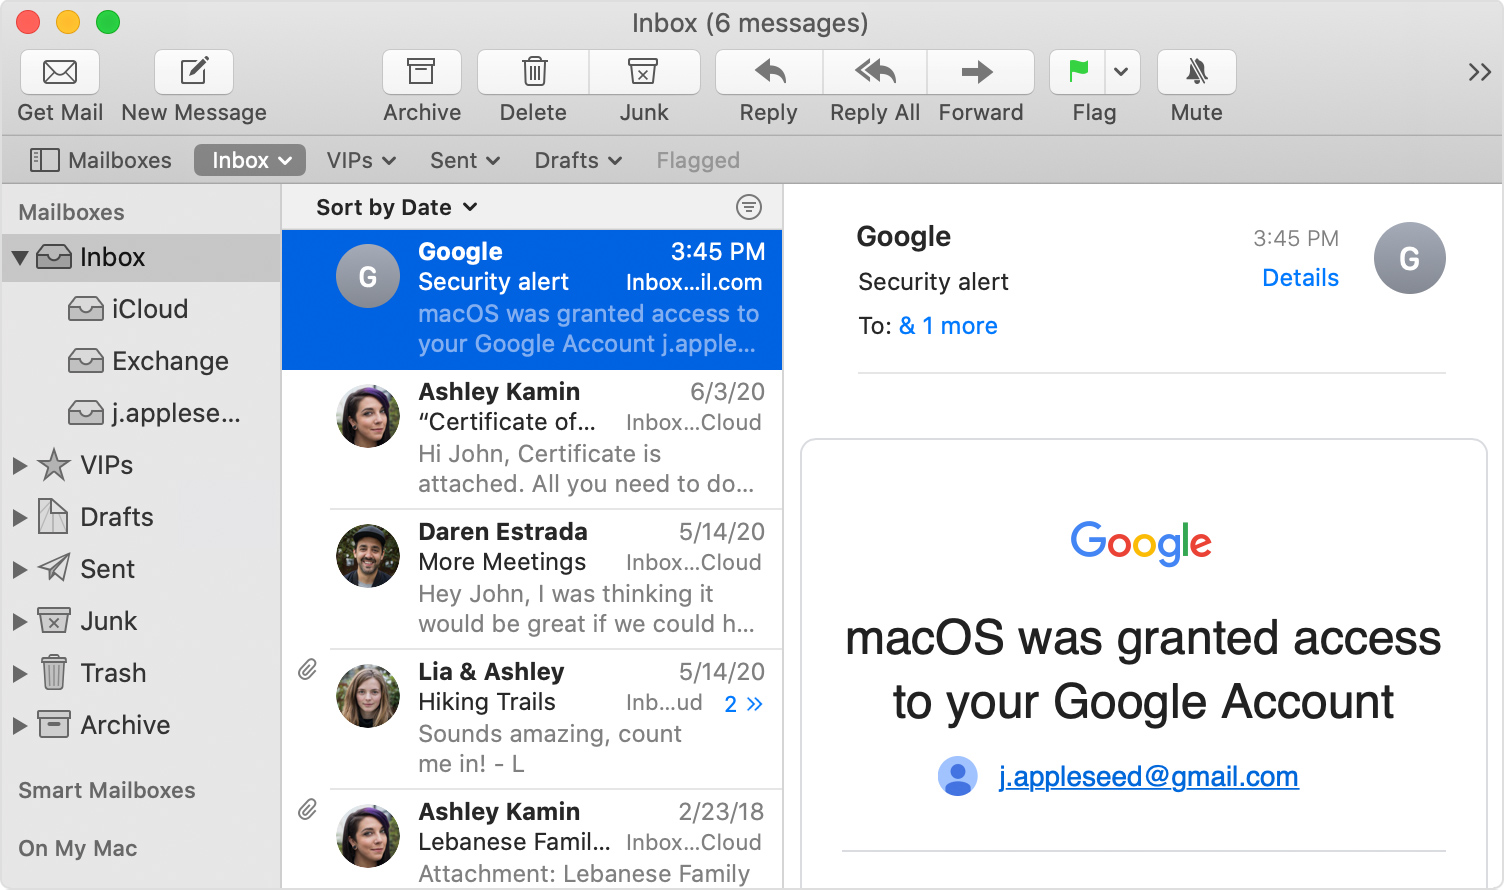 should i use gmail or mac for a new comany email